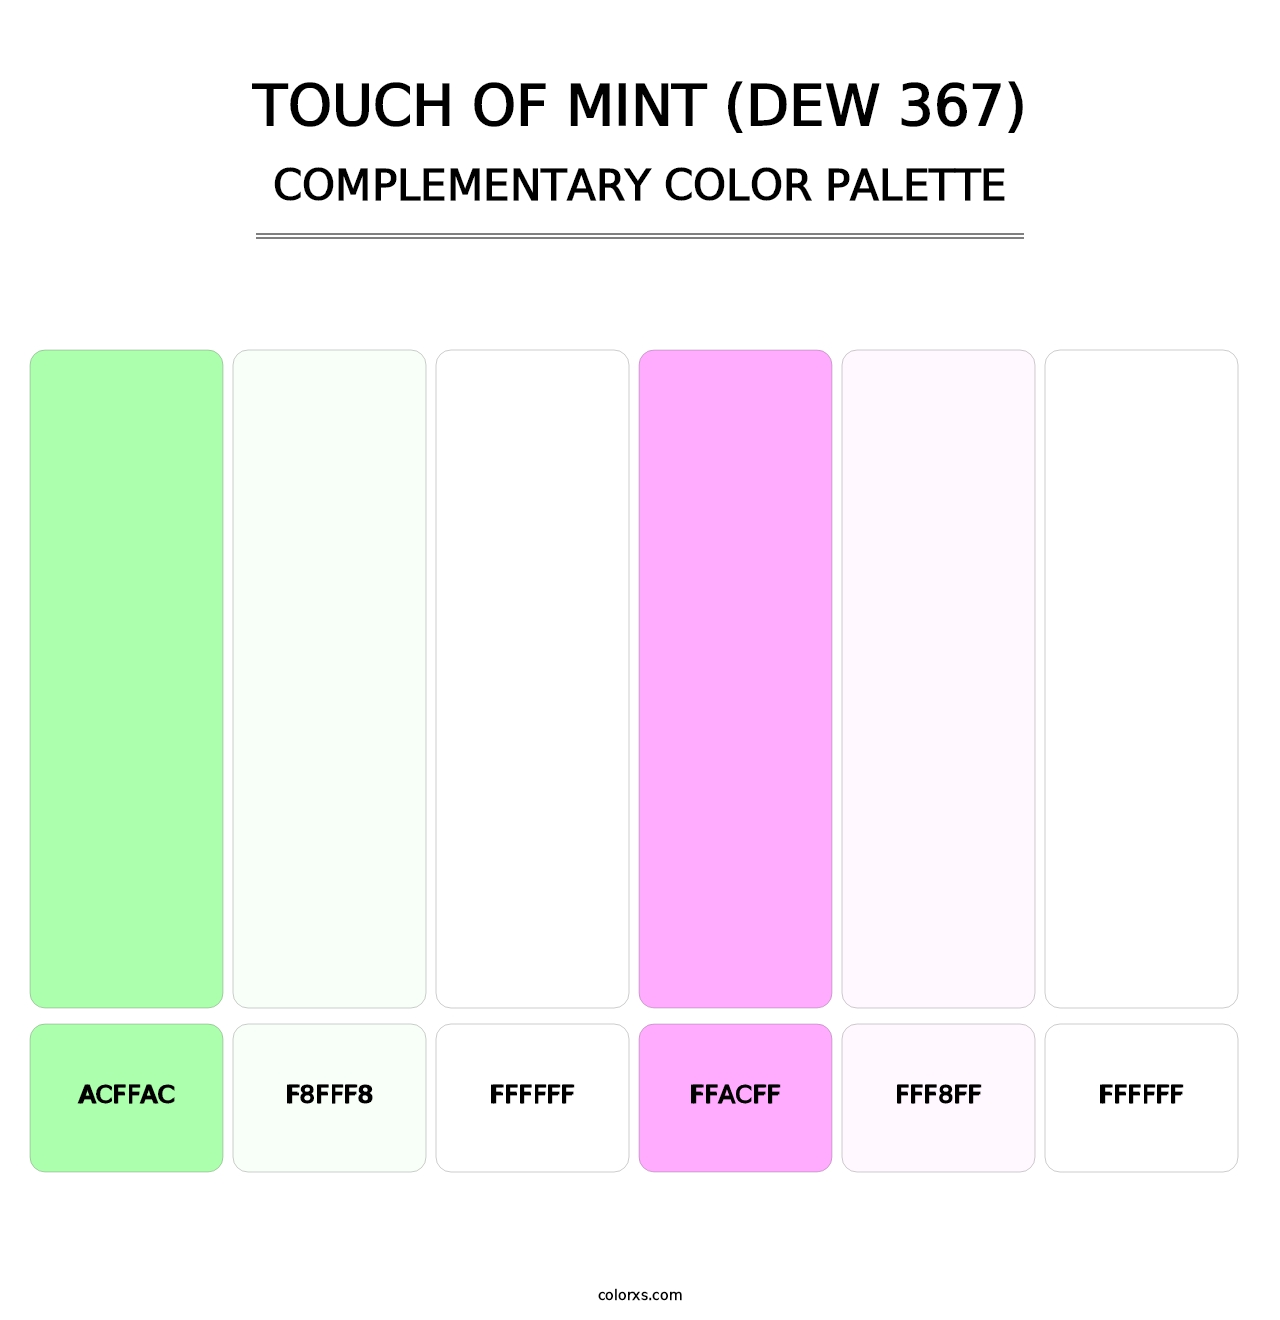 Touch of Mint (DEW 367) - Complementary Color Palette